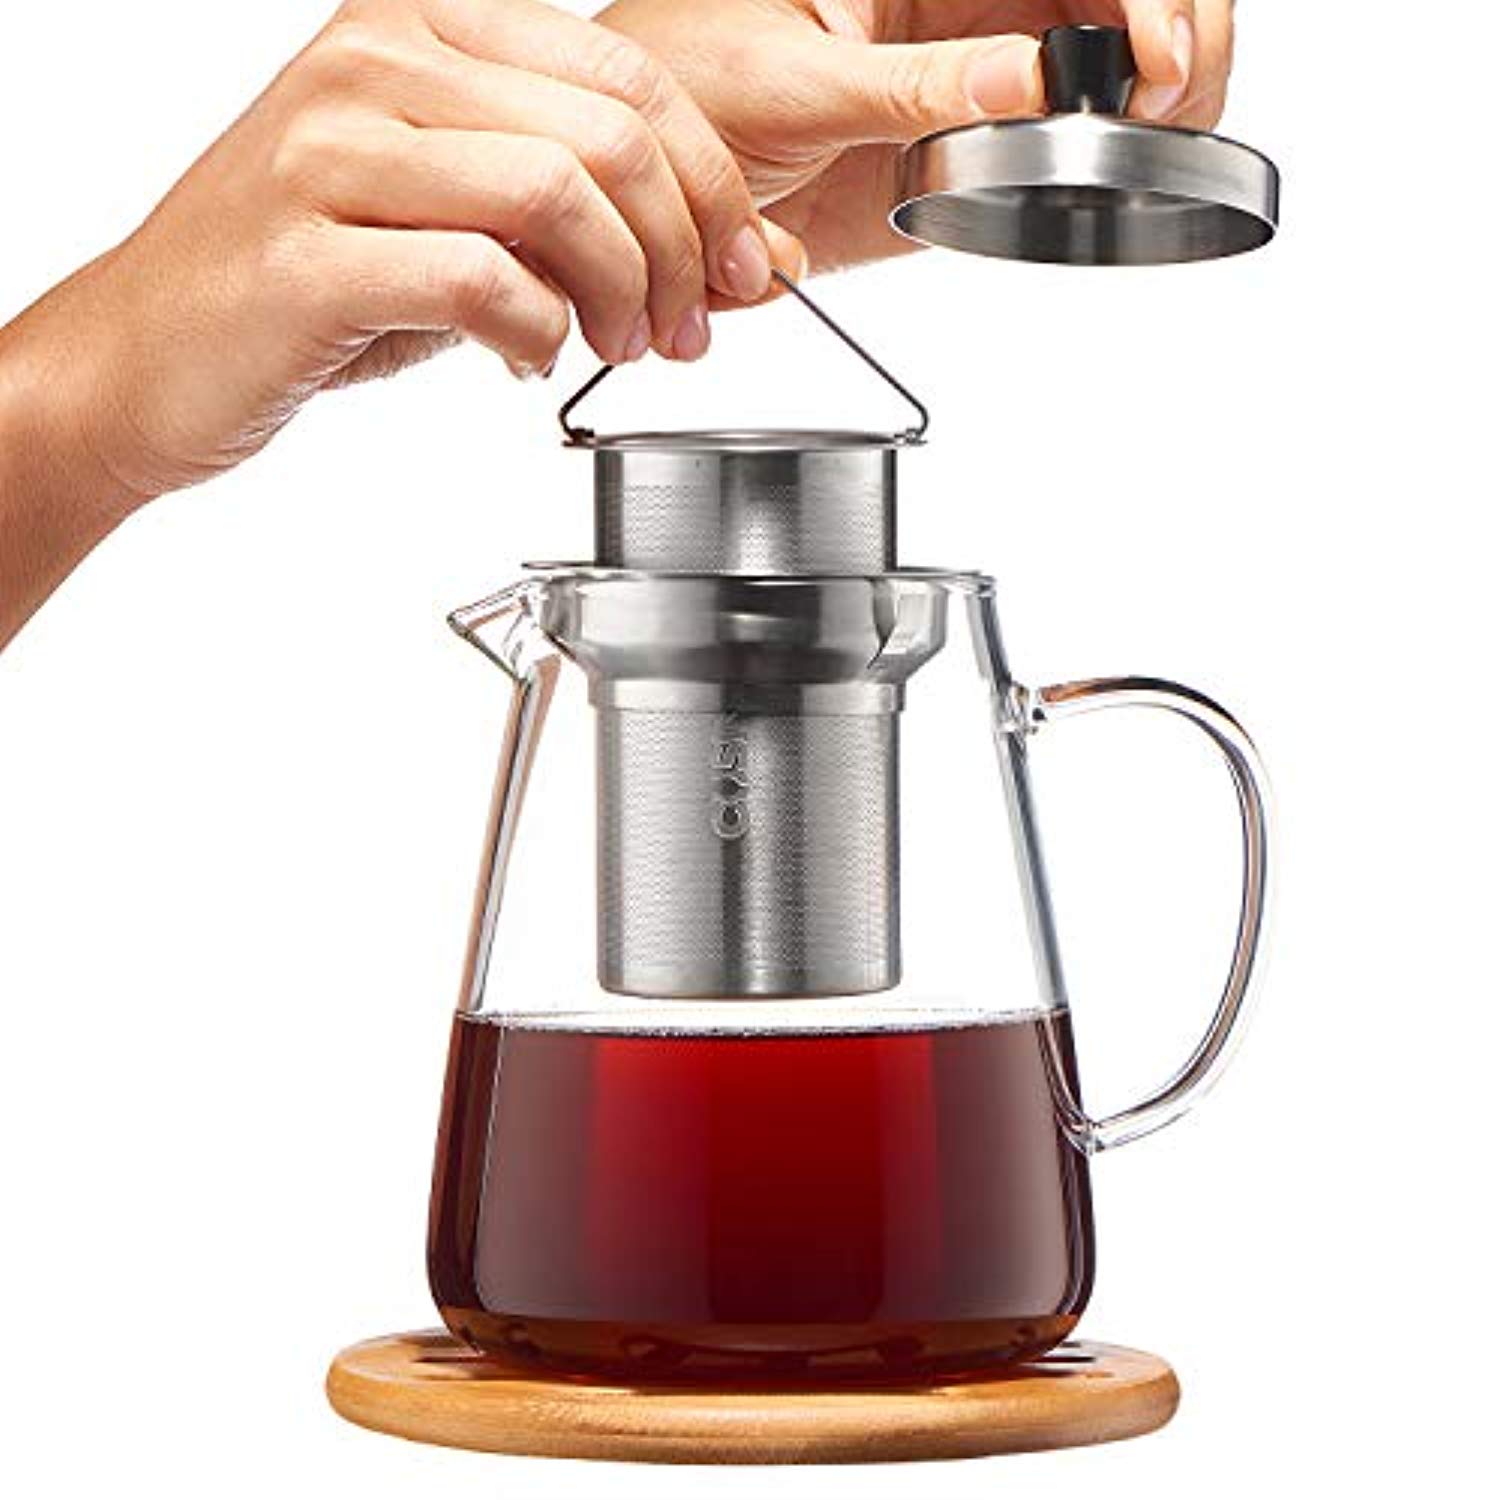 Let's Get Comfee (kettle with tea infuser)